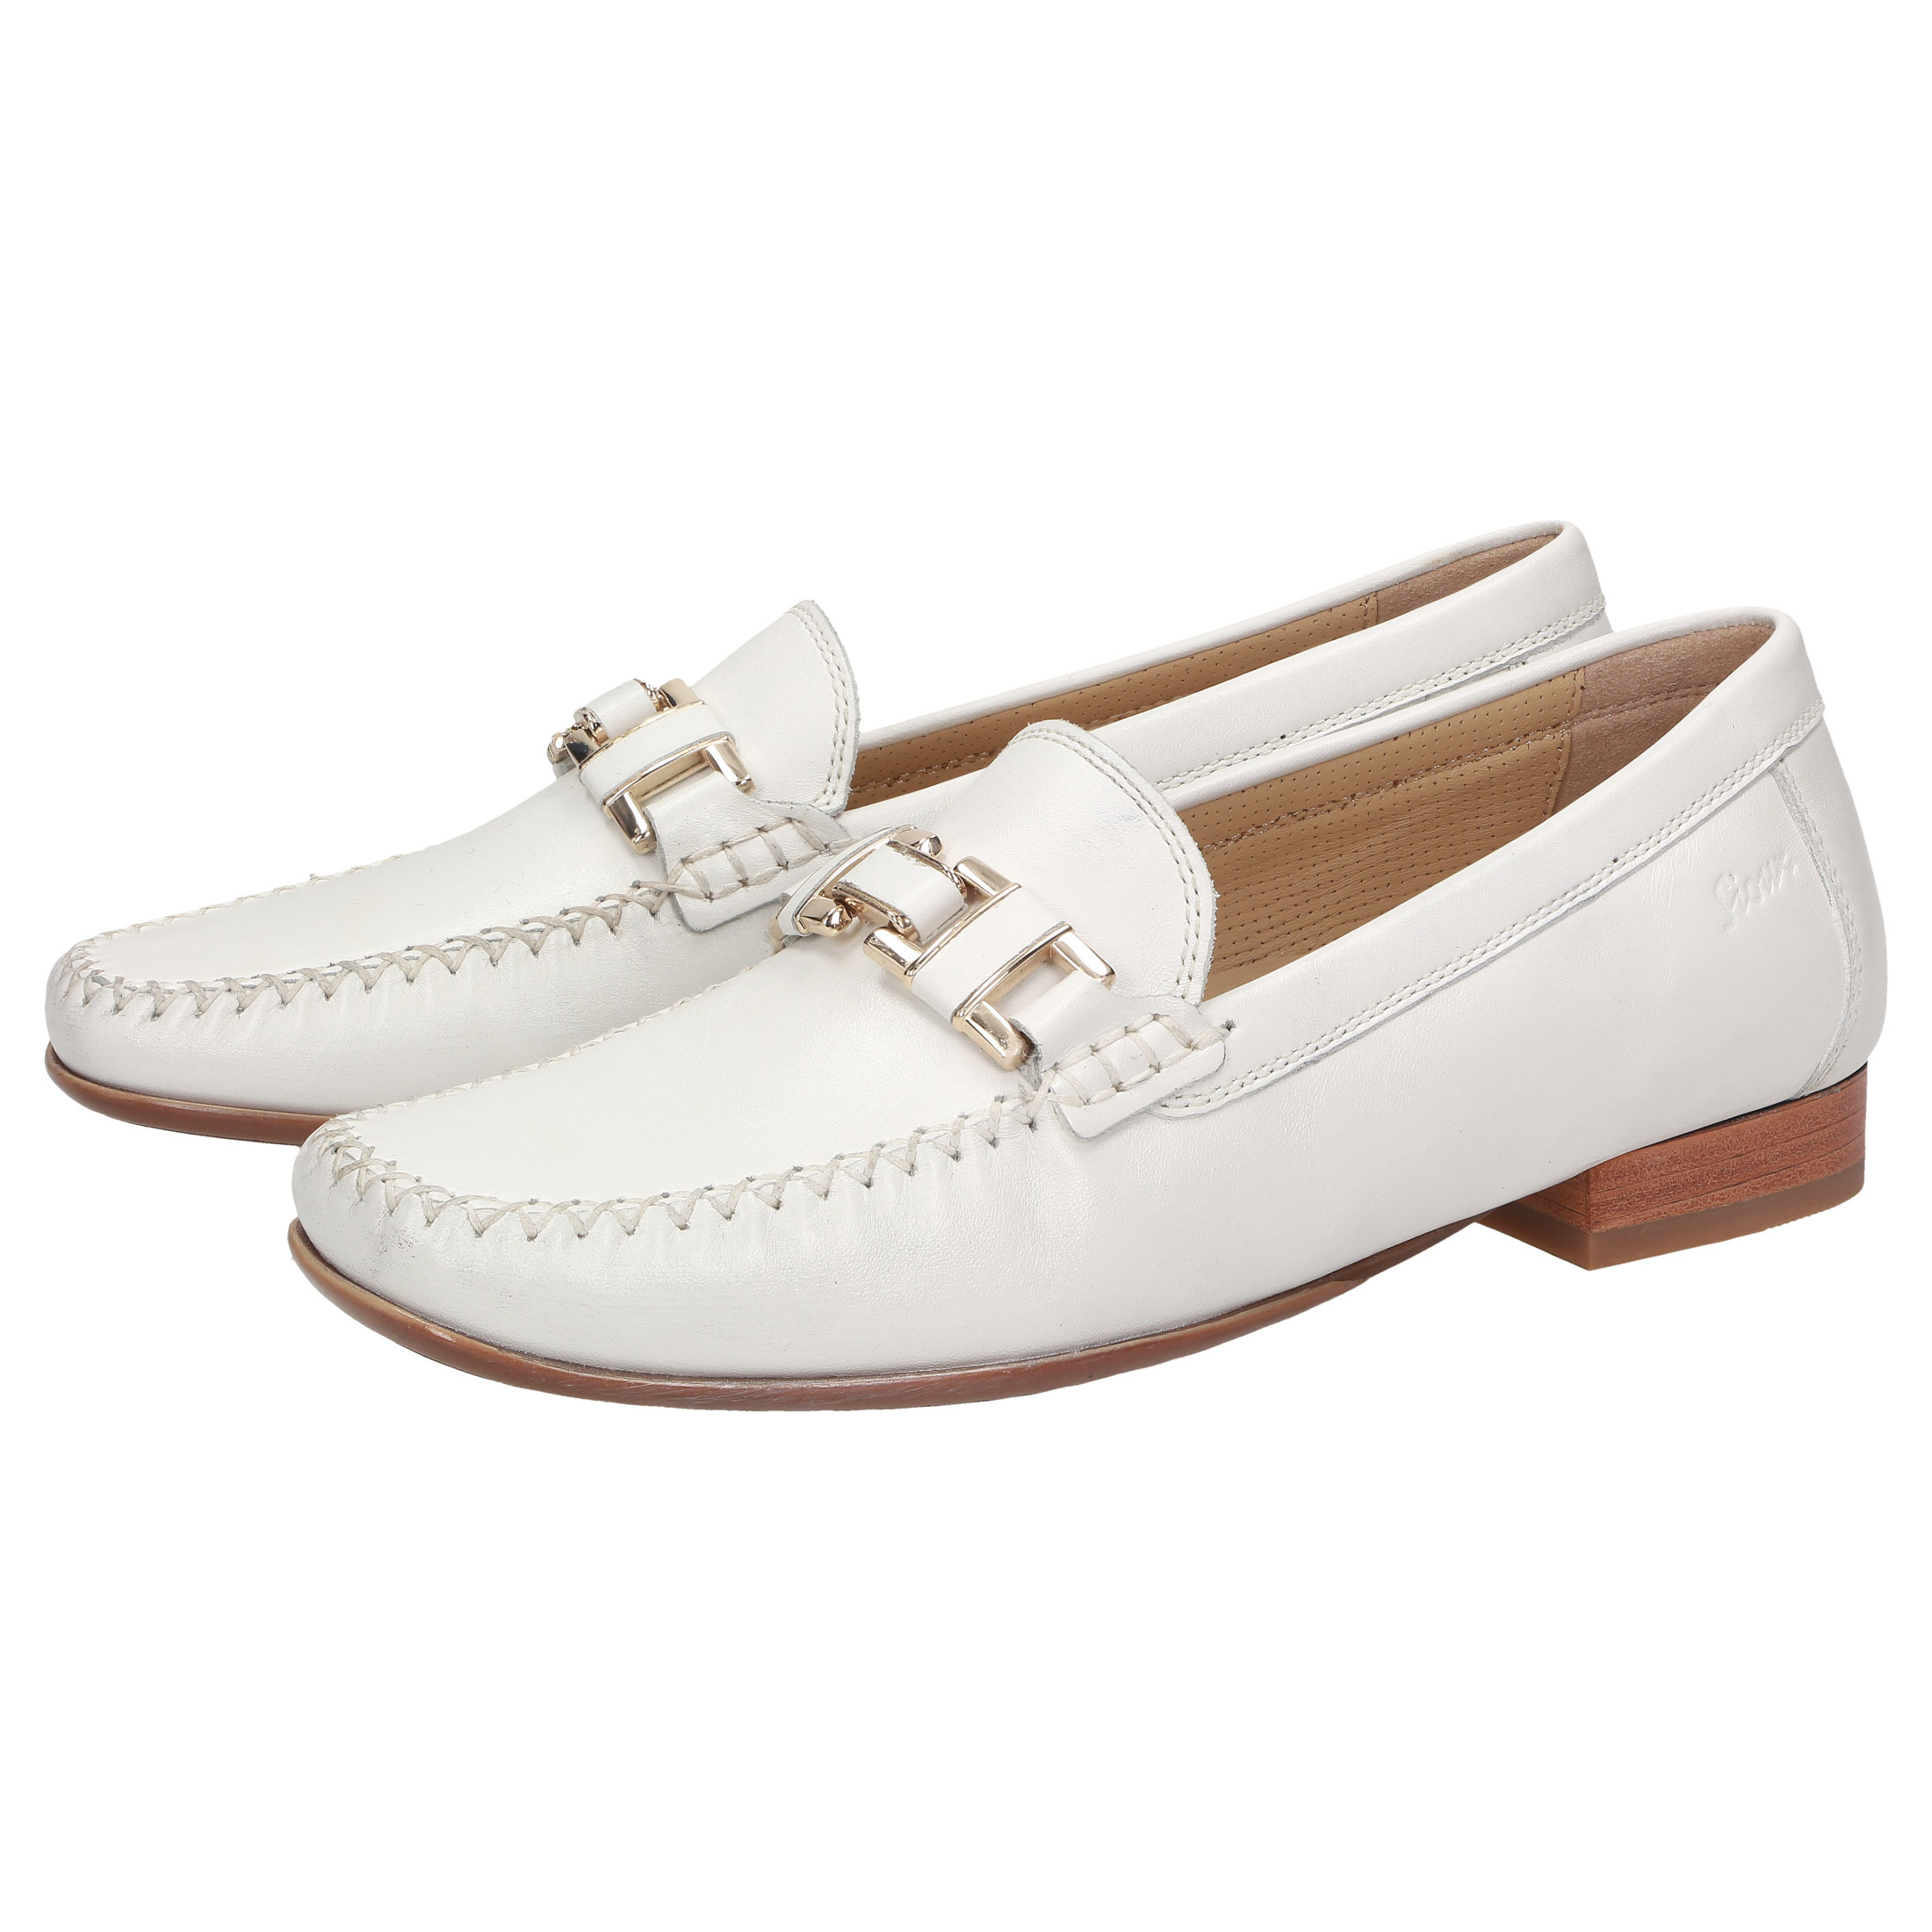 Sioux Cambria - White smooth leather